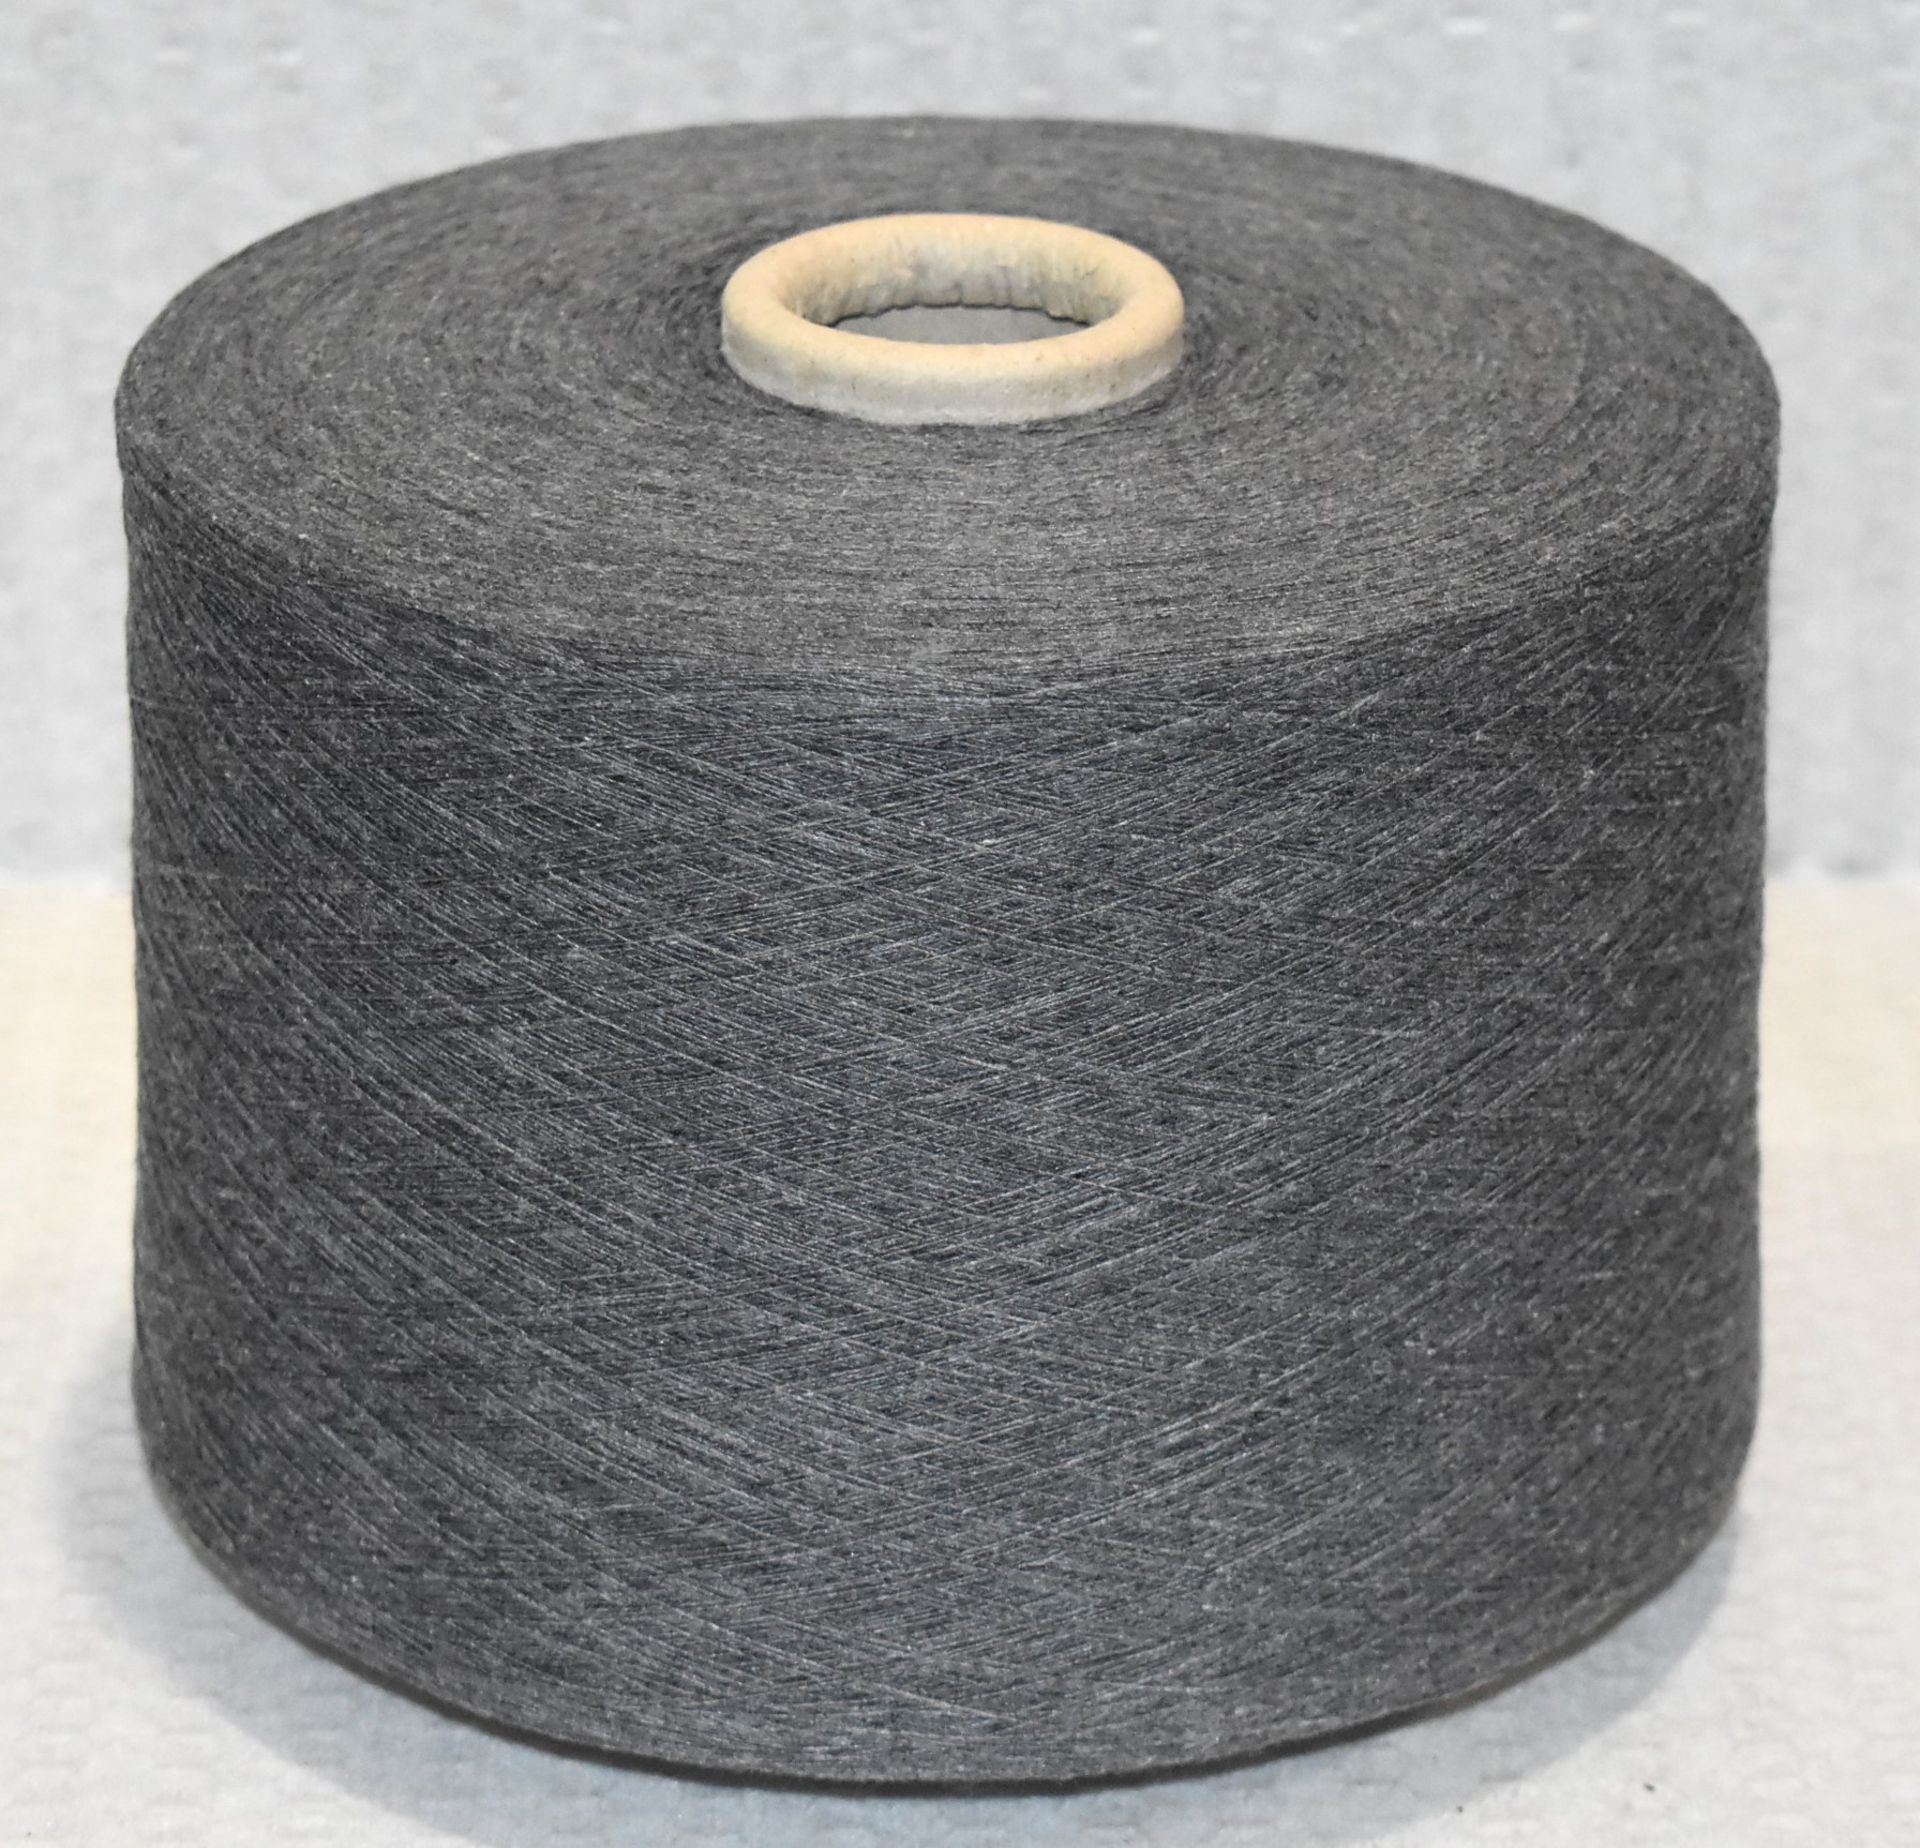 4 x Cones of 1/13 MicroCotton Knitting Yarn - Mid Grey - Approx Weight: 2,500g - New Stock ABL Yarn - Image 2 of 17